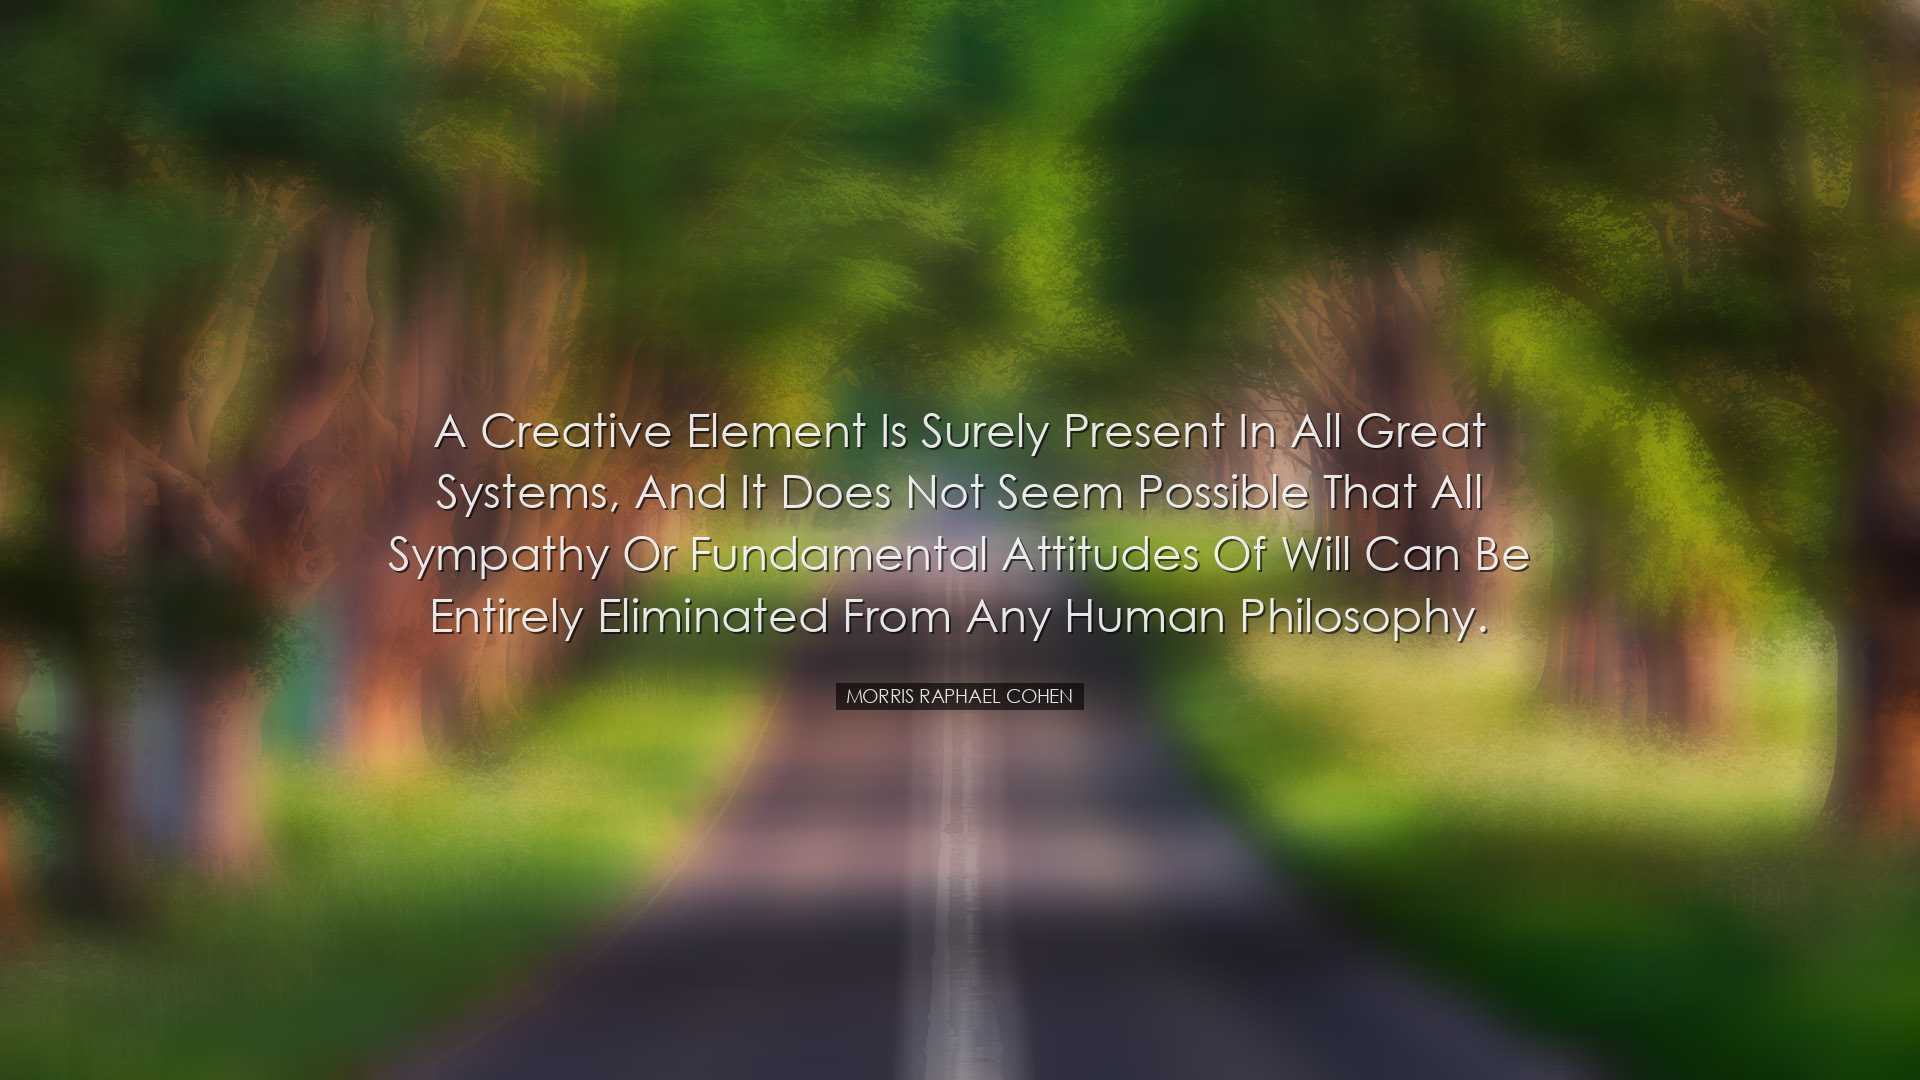 A creative element is surely present in all great systems, and it